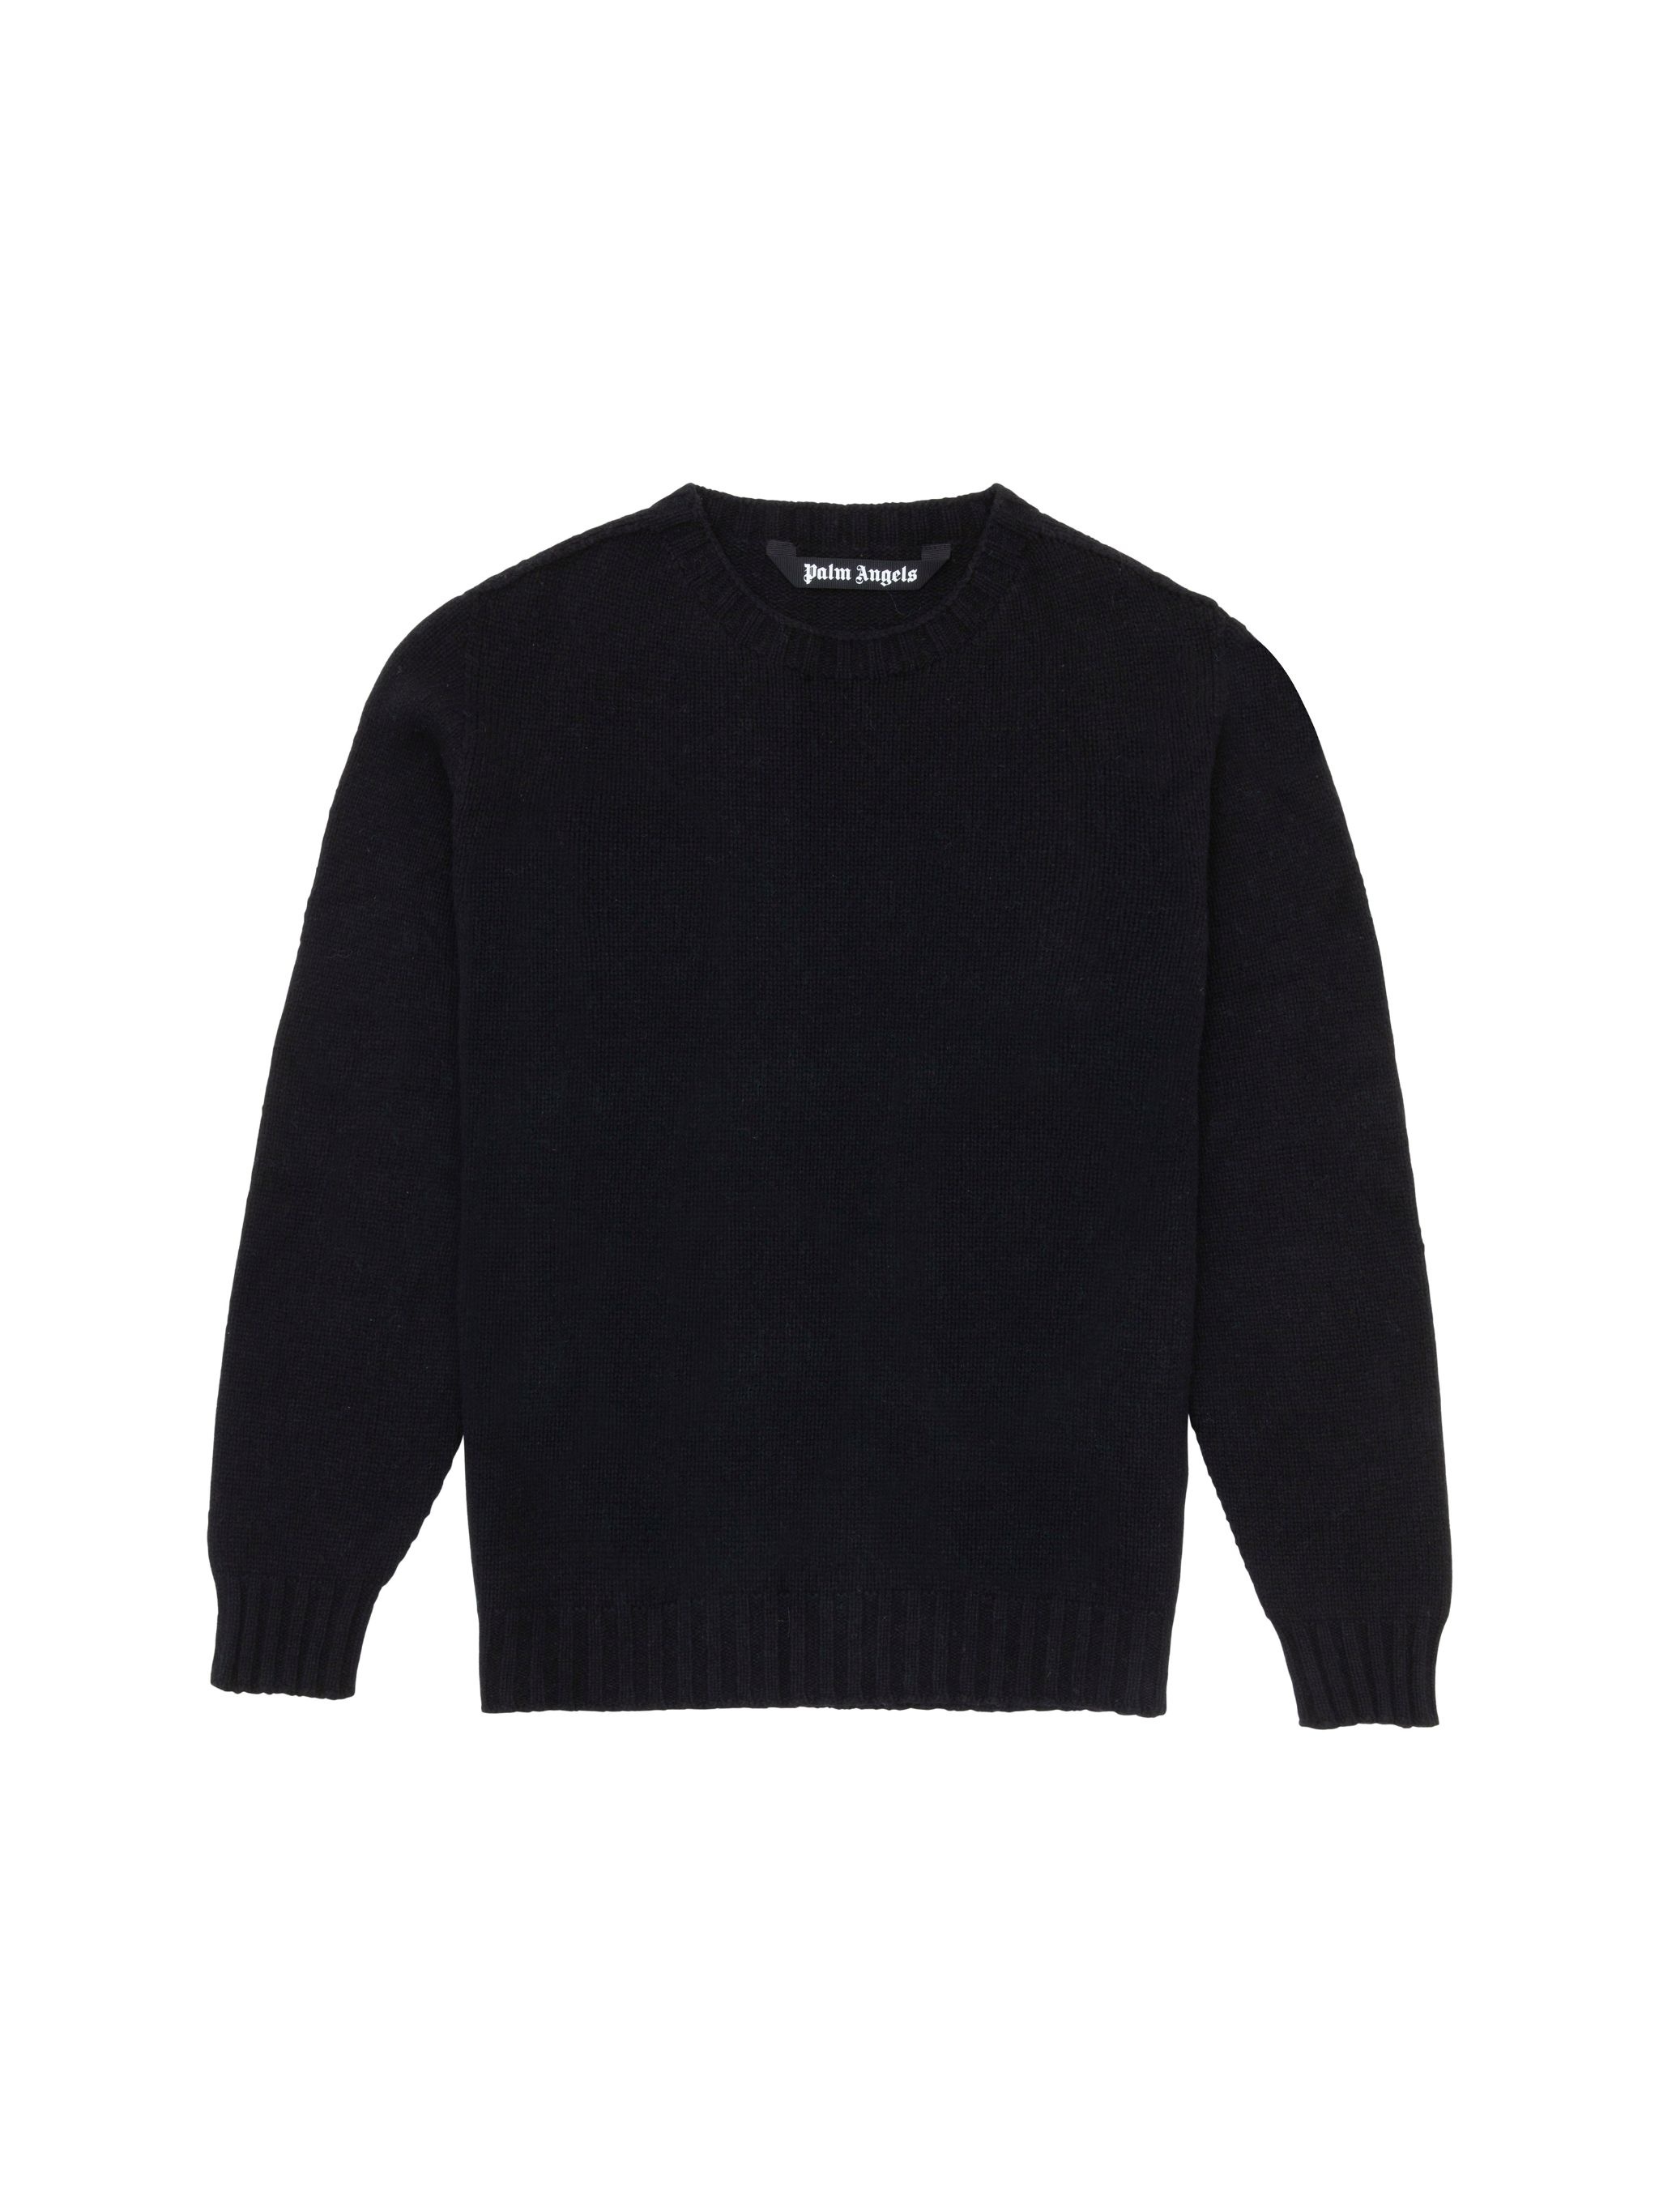 CURVED LOGO SWEATER - 1